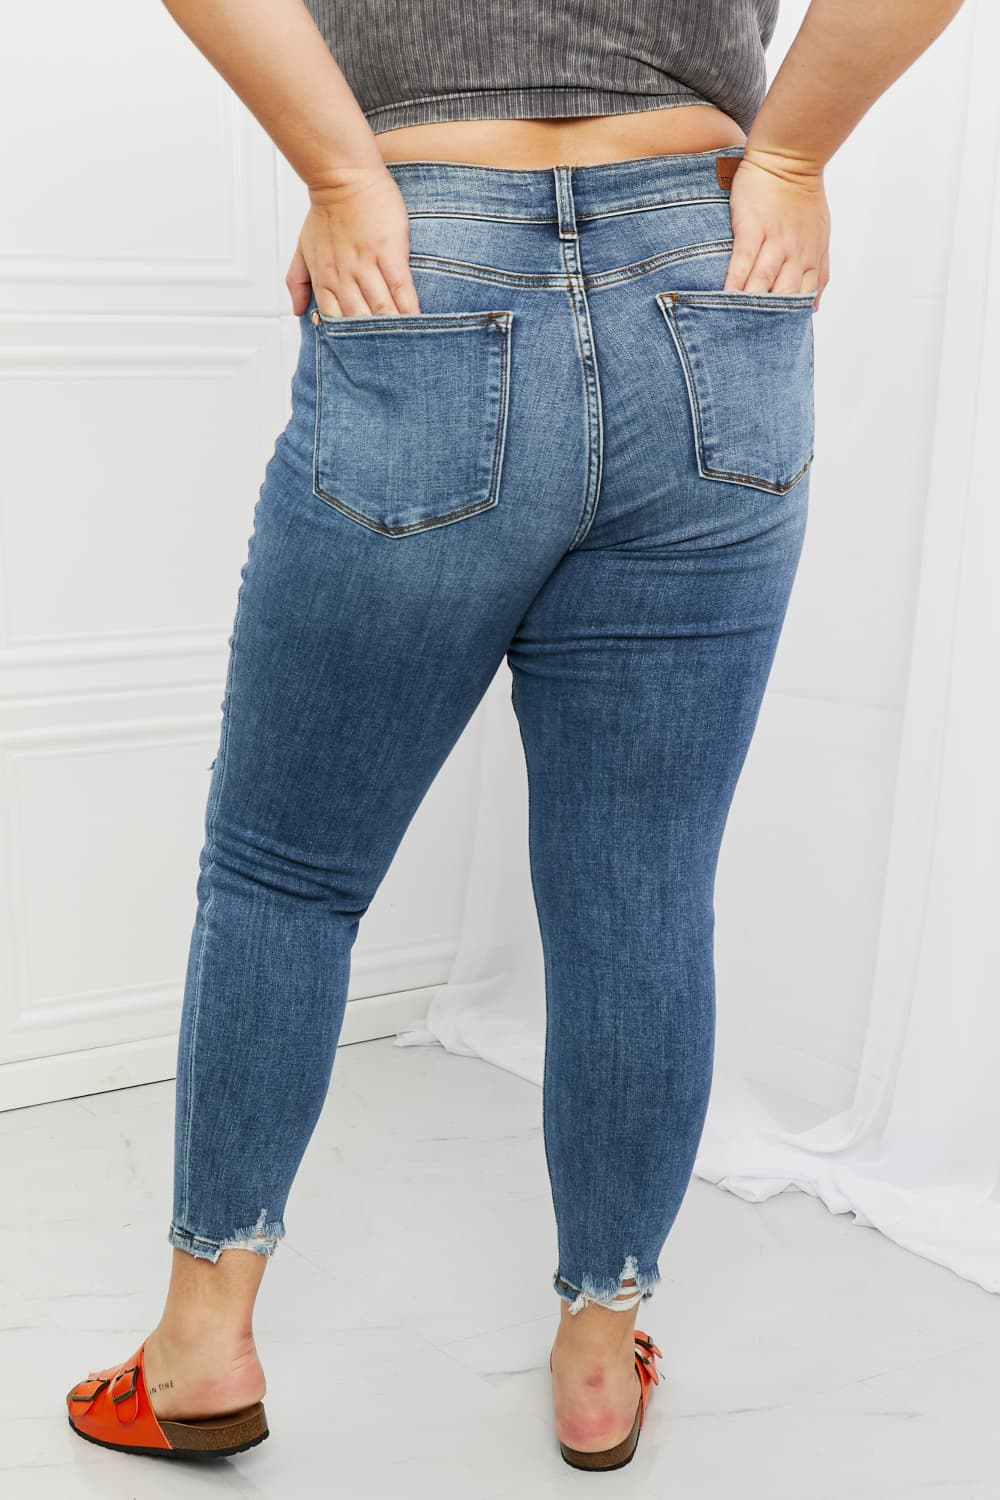 Dahlia Full Size Distressed Patch Jeans